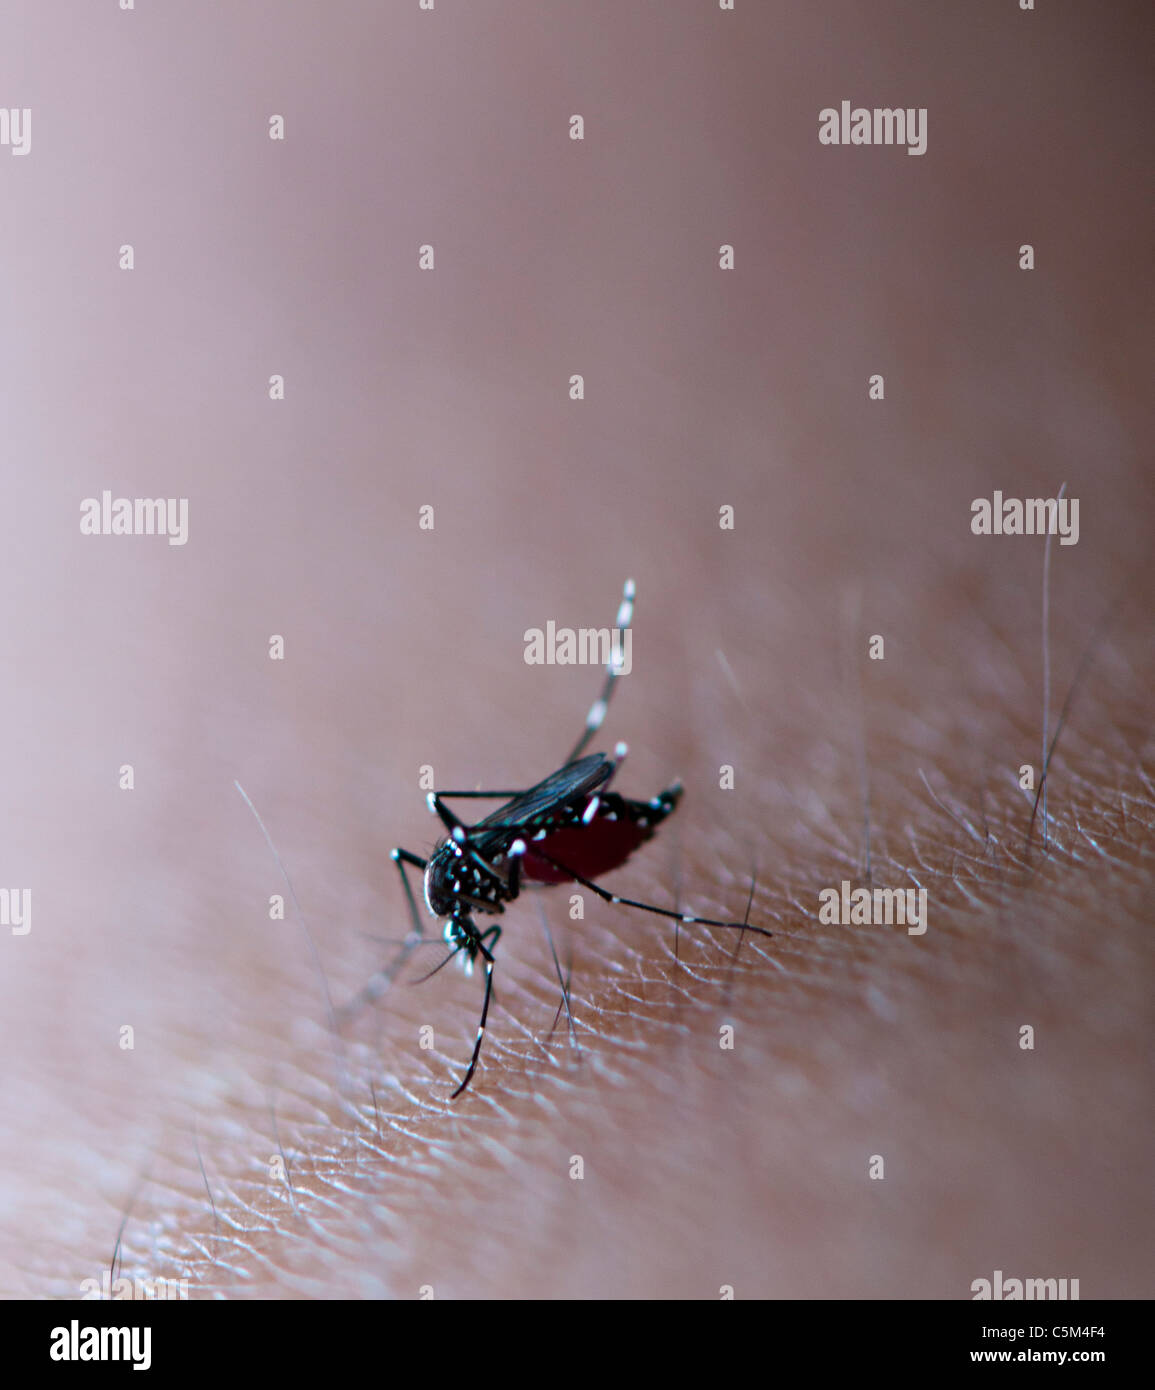 Asian tiger mosquito sucking blood from skin Stock Photo